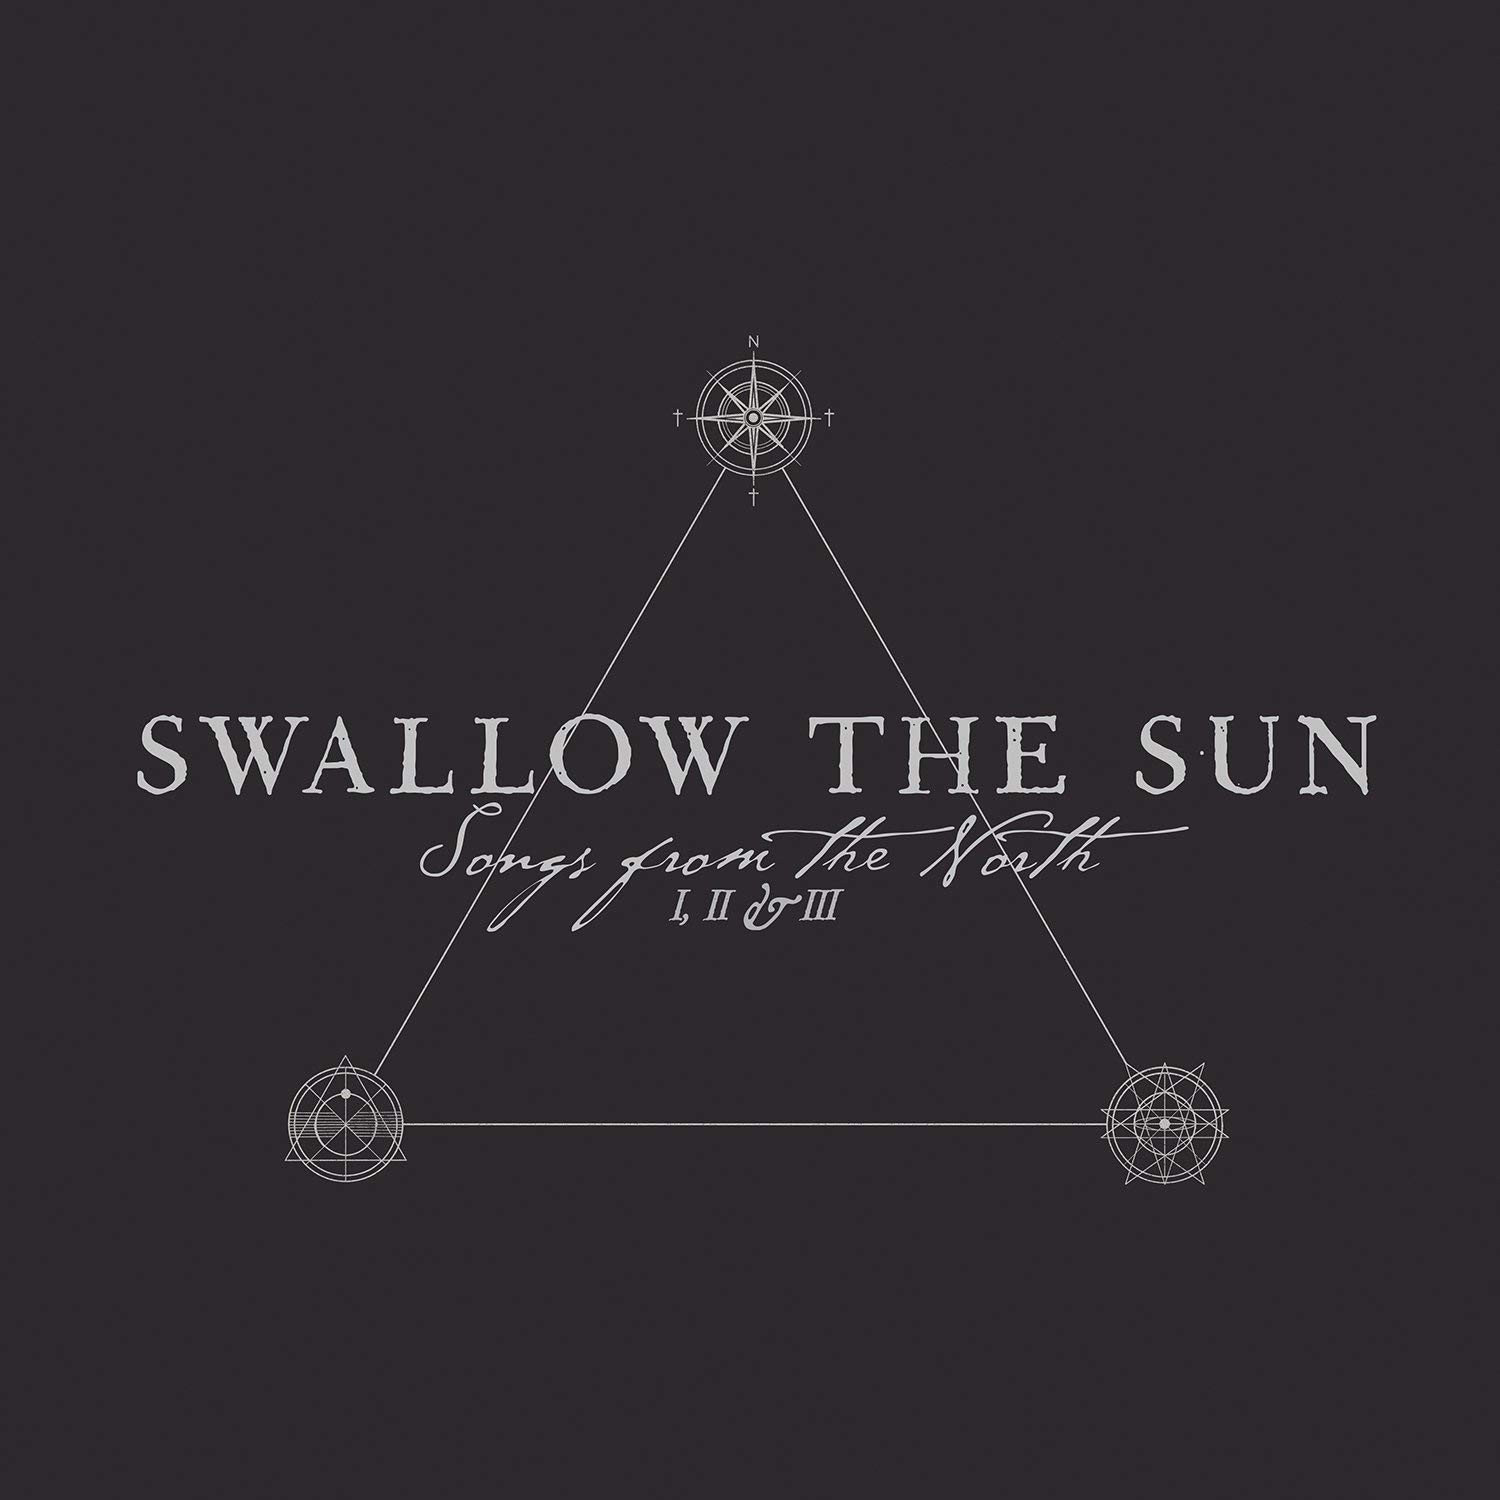 LP ploča Swallow The Sun Songs From the North I, II & III (5 LP)